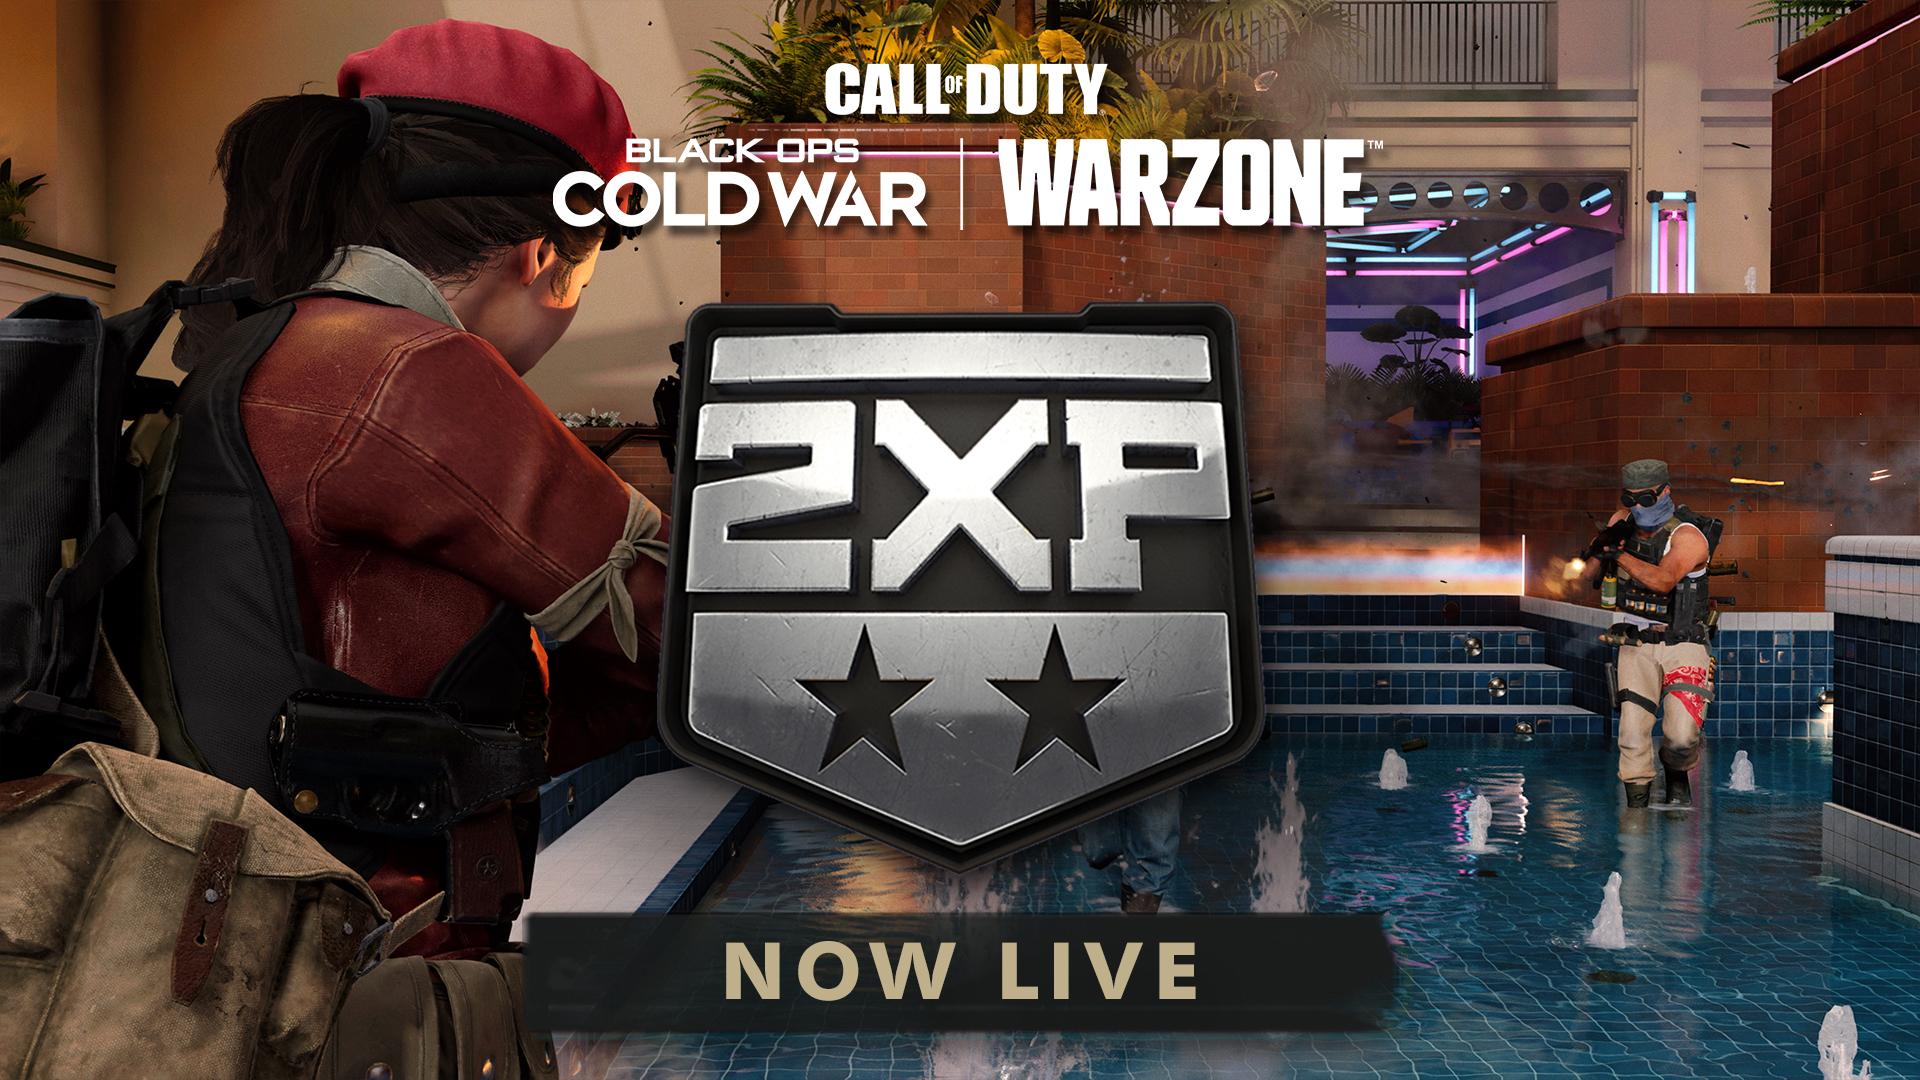 double xp double weapon xp black ops cold war warzone